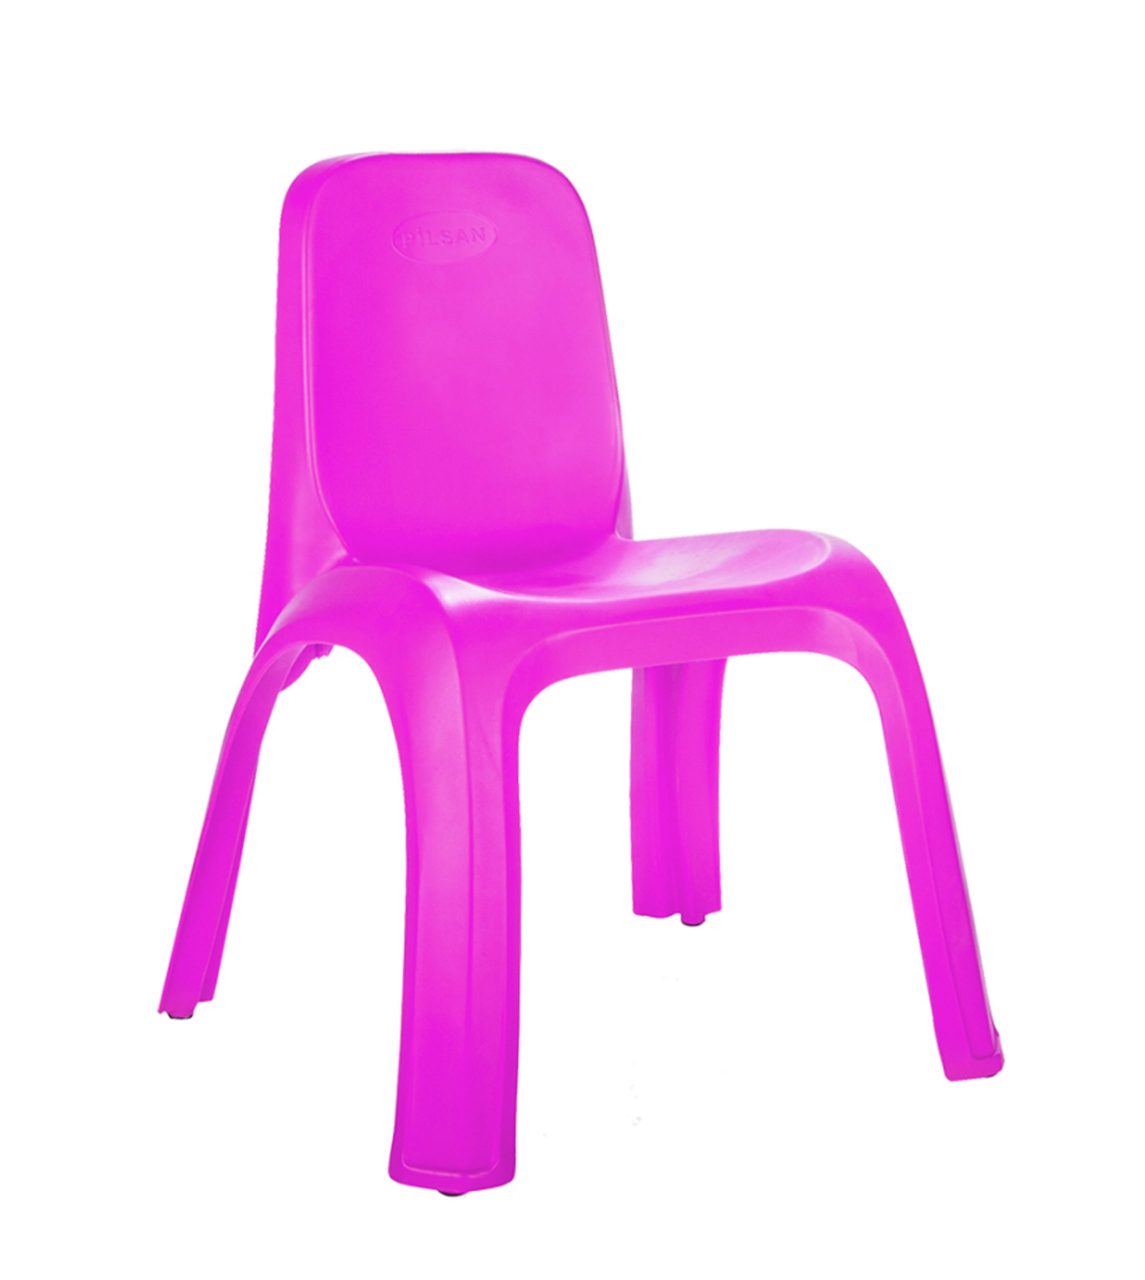 03-417-King-Chair-Pink-scaled